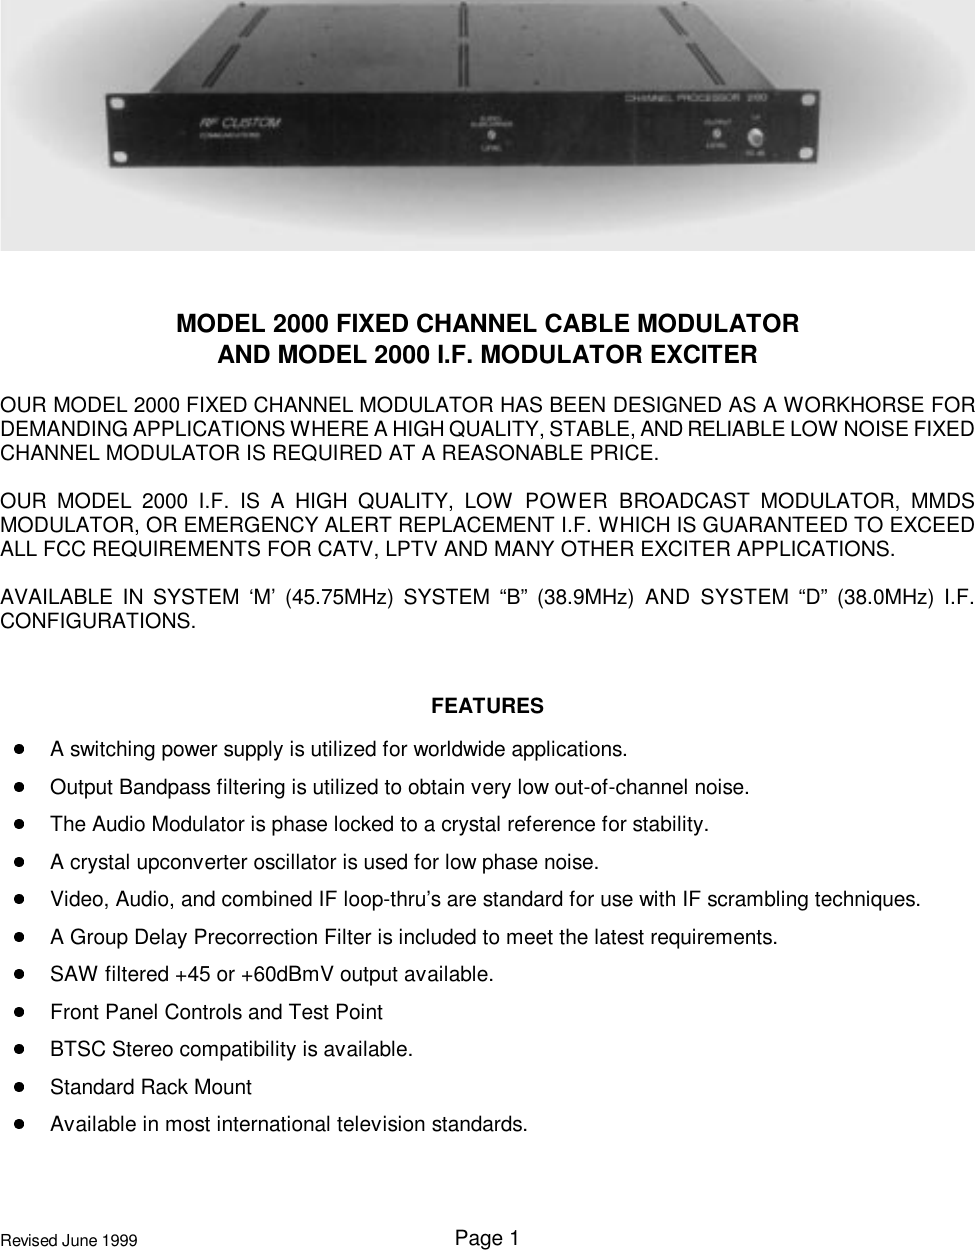 Page 1Revised June 1999MODEL 2000 FIXED CHANNEL CABLE MODULATORAND MODEL 2000 I.F. MODULATOR EXCITEROUR MODEL 2000 FIXED CHANNEL MODULATOR HAS BEEN DESIGNED AS A WORKHORSE FORDEMANDING APPLICATIONS WHERE A HIGH QUALITY, STABLE, AND RELIABLE LOW NOISE FIXEDCHANNEL MODULATOR IS REQUIRED AT A REASONABLE PRICE.OUR MODEL 2000 I.F. IS A HIGH QUALITY, LOW POWER BROADCAST MODULATOR, MMDSMODULATOR, OR EMERGENCY ALERT REPLACEMENT I.F. WHICH IS GUARANTEED TO EXCEEDALL FCC REQUIREMENTS FOR CATV, LPTV AND MANY OTHER EXCITER APPLICATIONS.AVAILABLE IN SYSTEM ‘M’ (45.75MHz) SYSTEM “B” (38.9MHz) AND SYSTEM “D” (38.0MHz) I.F.CONFIGURATIONS.FEATURESA switching power supply is utilized for worldwide applications.Output Bandpass filtering is utilized to obtain very low out-of-channel noise.The Audio Modulator is phase locked to a crystal reference for stability.A crystal upconverter oscillator is used for low phase noise.Video, Audio, and combined IF loop-thru’s are standard for use with IF scrambling techniques.A Group Delay Precorrection Filter is included to meet the latest requirements.SAW filtered +45 or +60dBmV output available.Front Panel Controls and Test PointBTSC Stereo compatibility is available.Standard Rack MountAvailable in most international television standards.